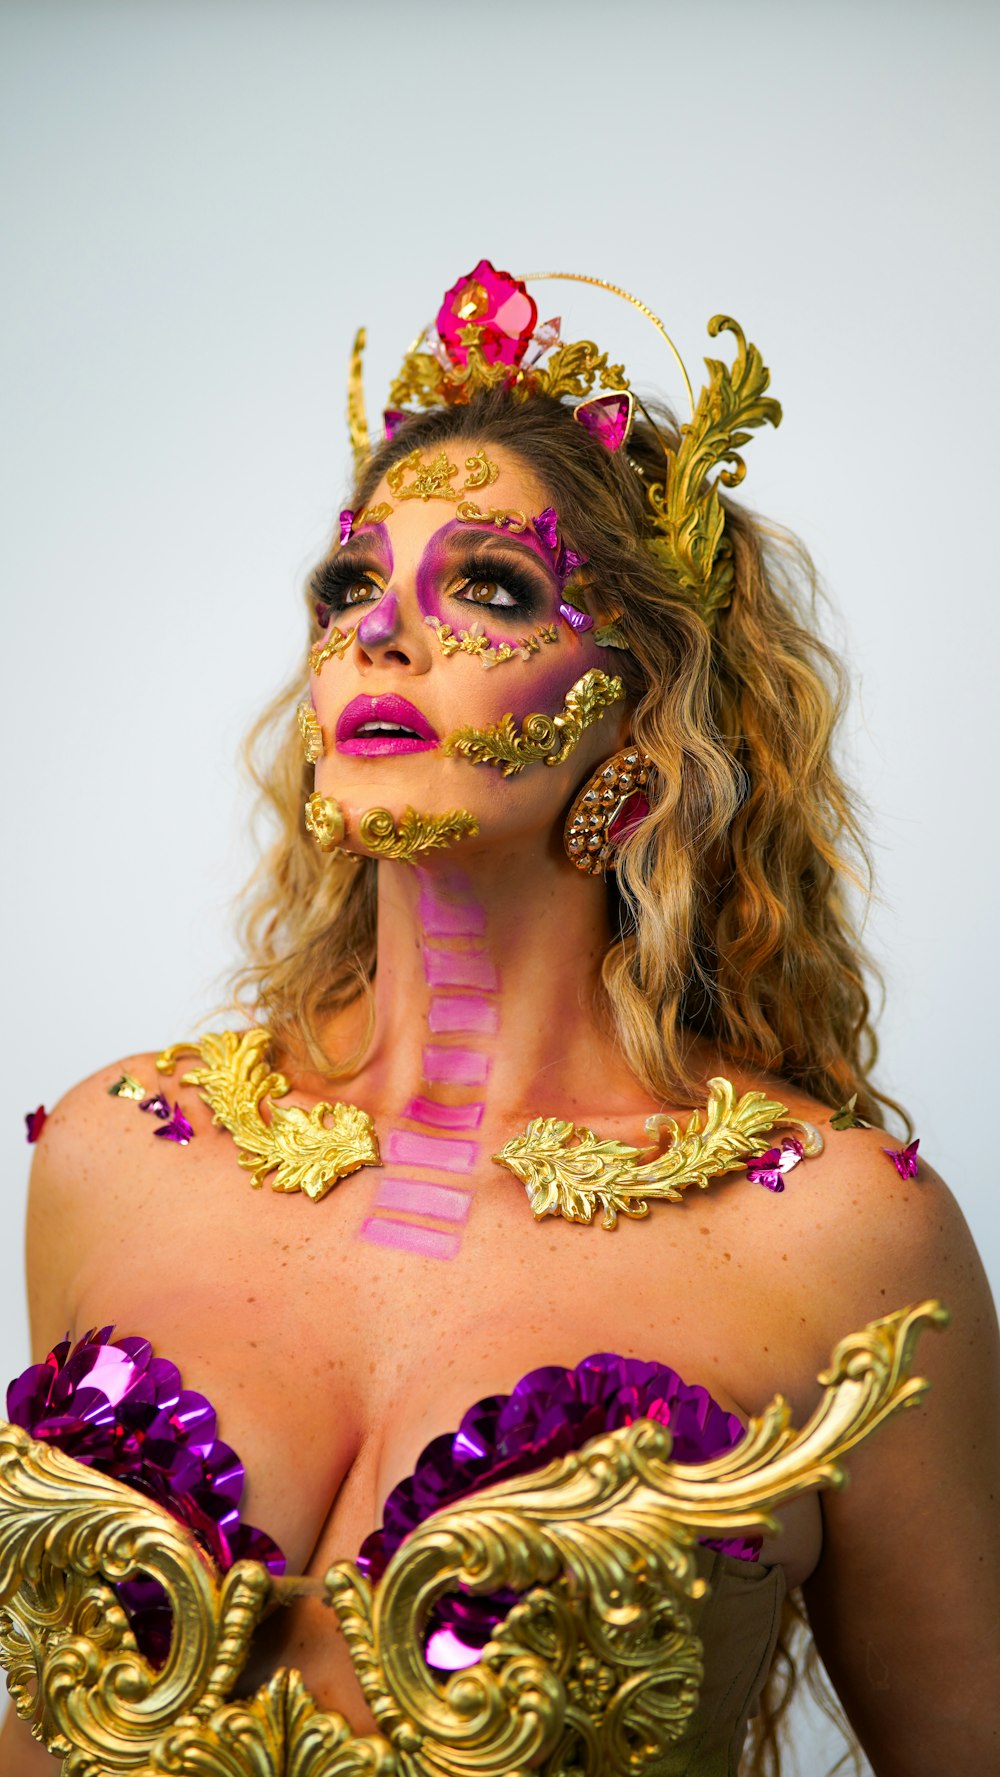 a woman with colorful makeup and a crown